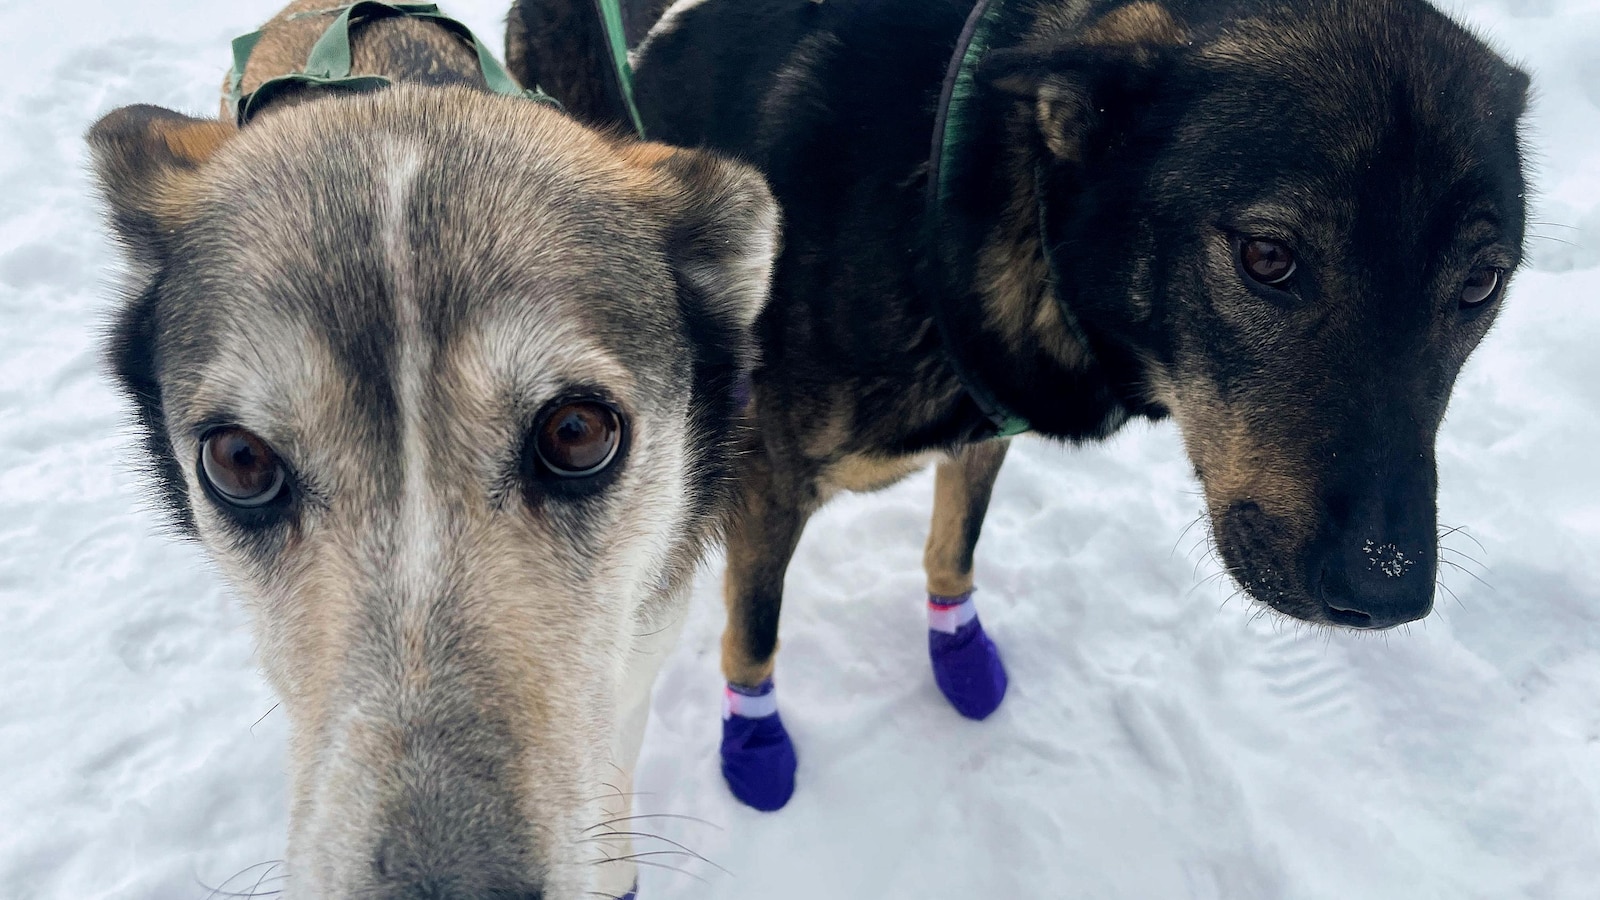 Alaska's Iditarod dogs receive neon visibility harnesses following fatal training accidents